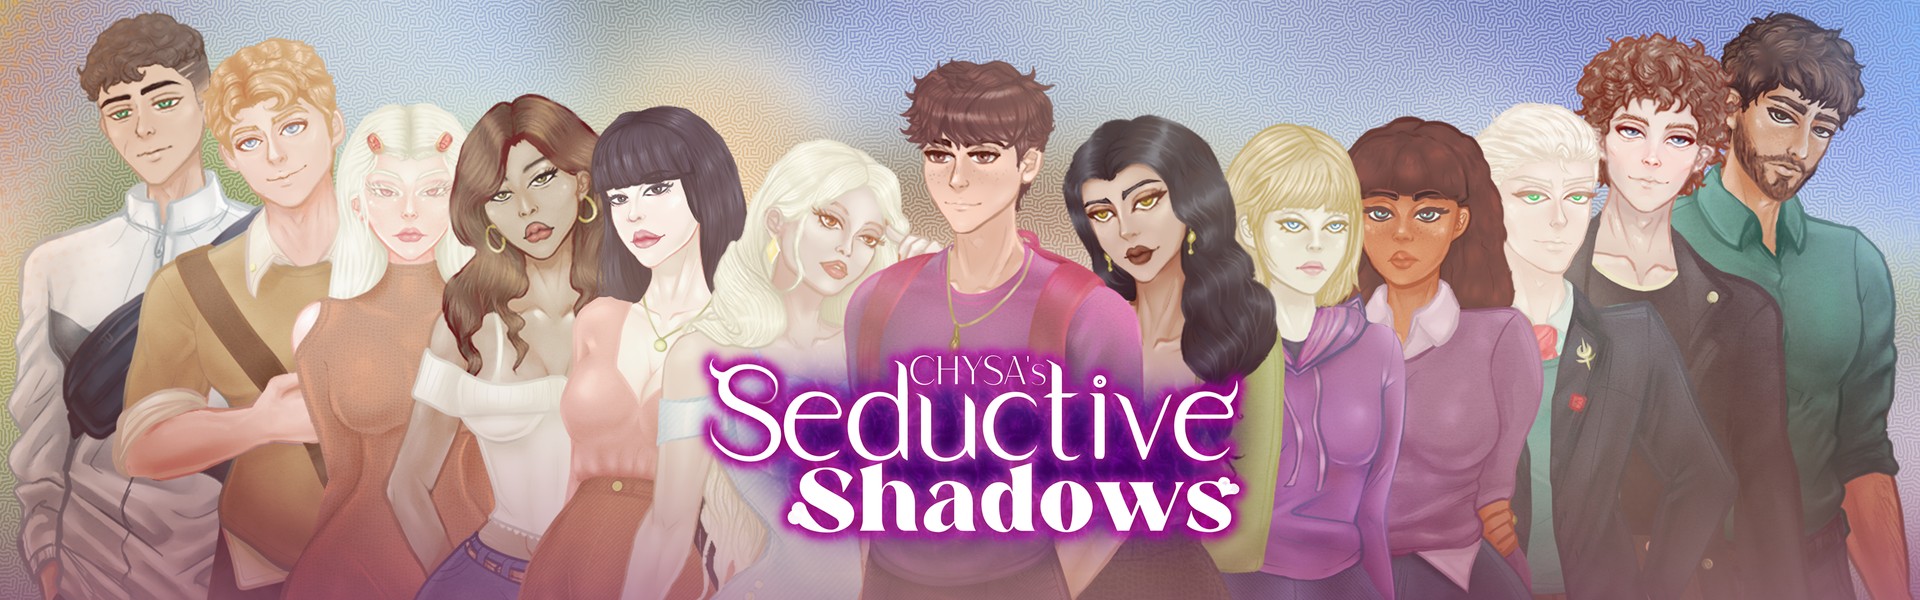 Seductive Shadows Adult Game Android Apk Download (1)